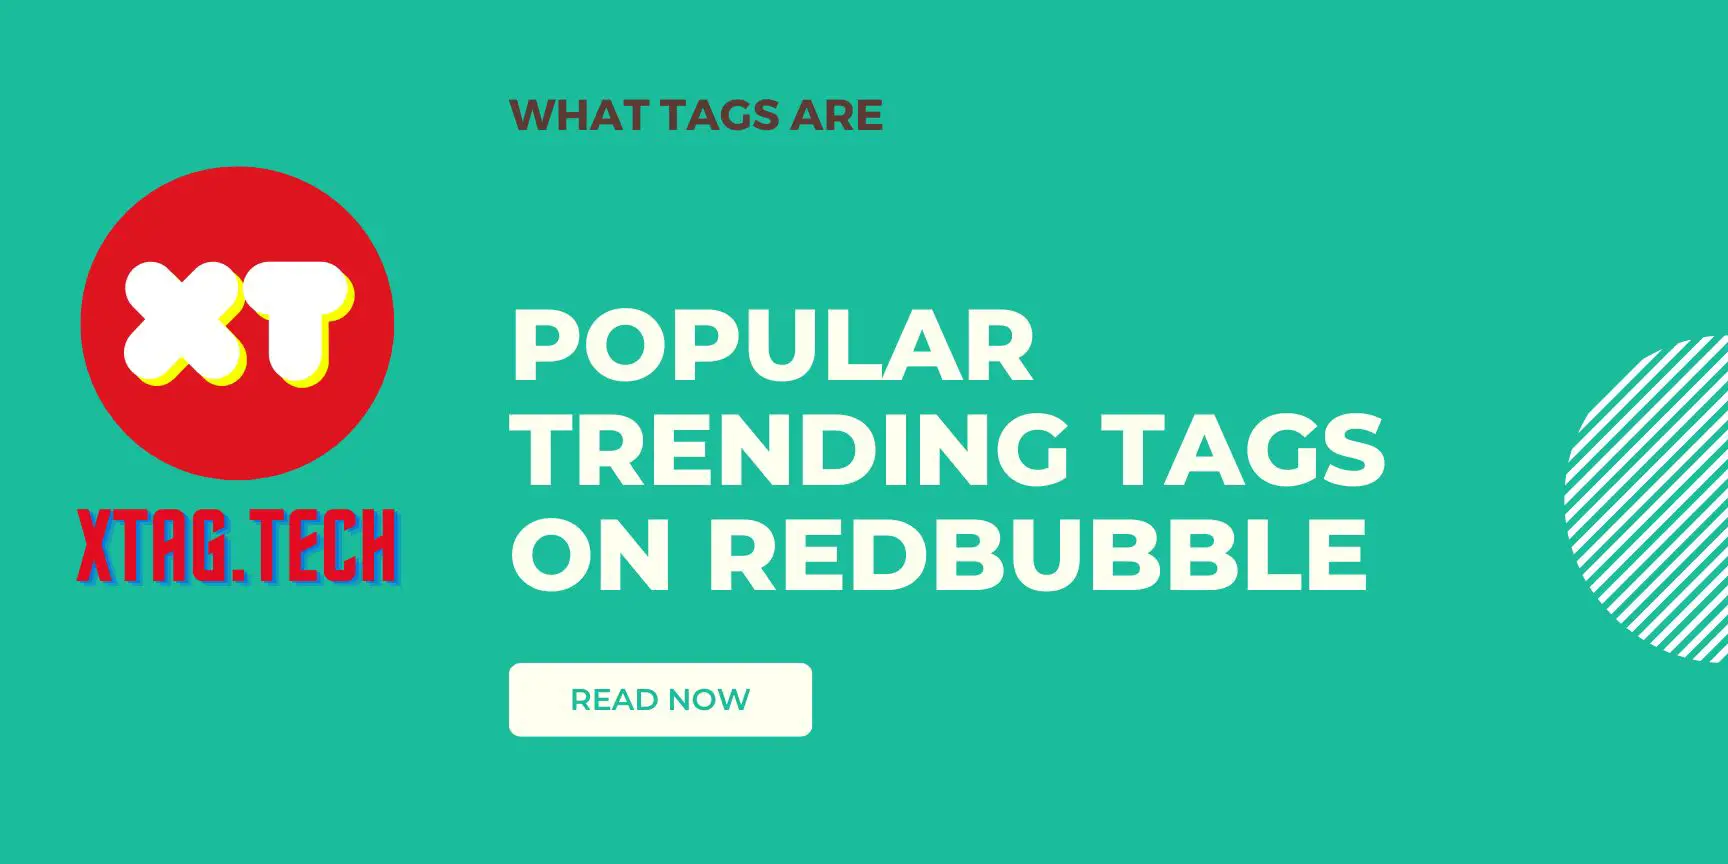 What are the most popular tags on Redbubble?